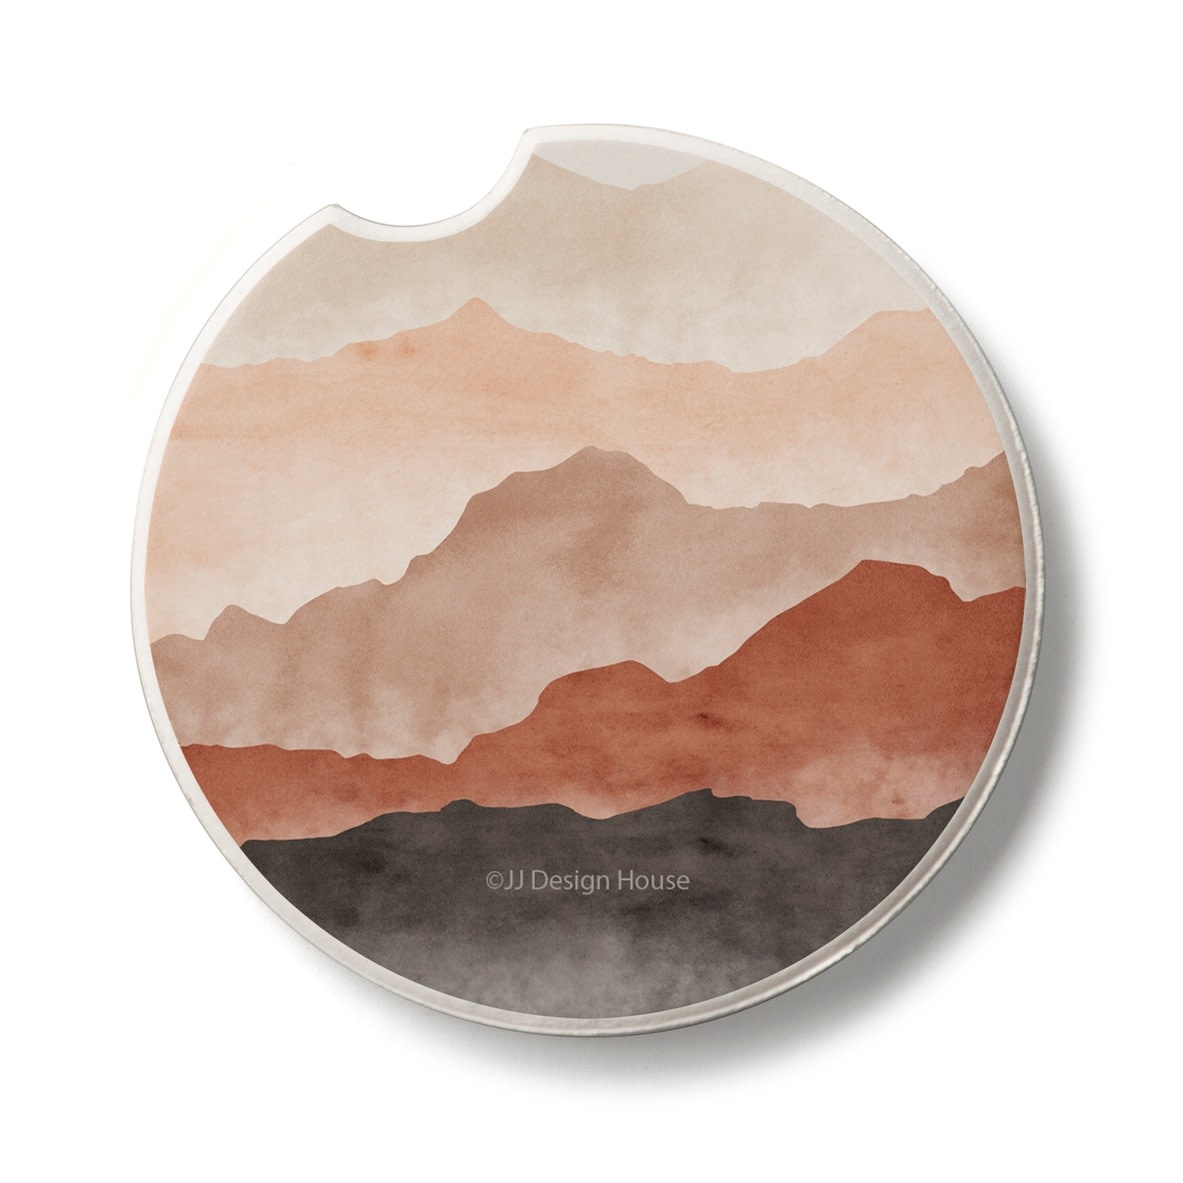 CounterArt and Highland Home Thirstystone "Terracotta Hills" Absorbent Stone Car Coaster